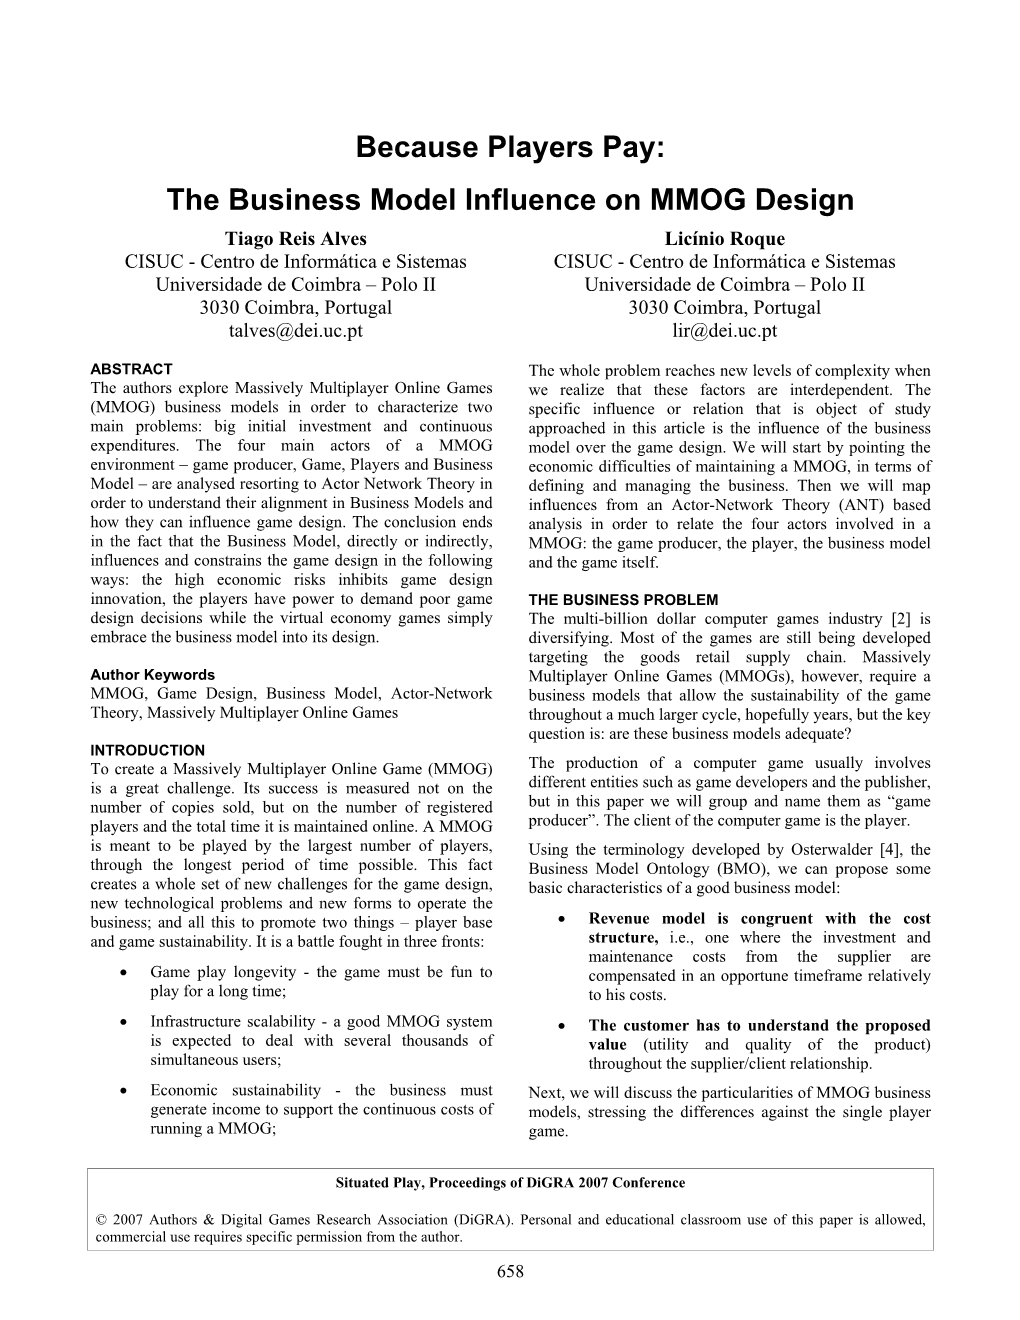 Because Players Pay: the Business Model Influence on MMOG Design